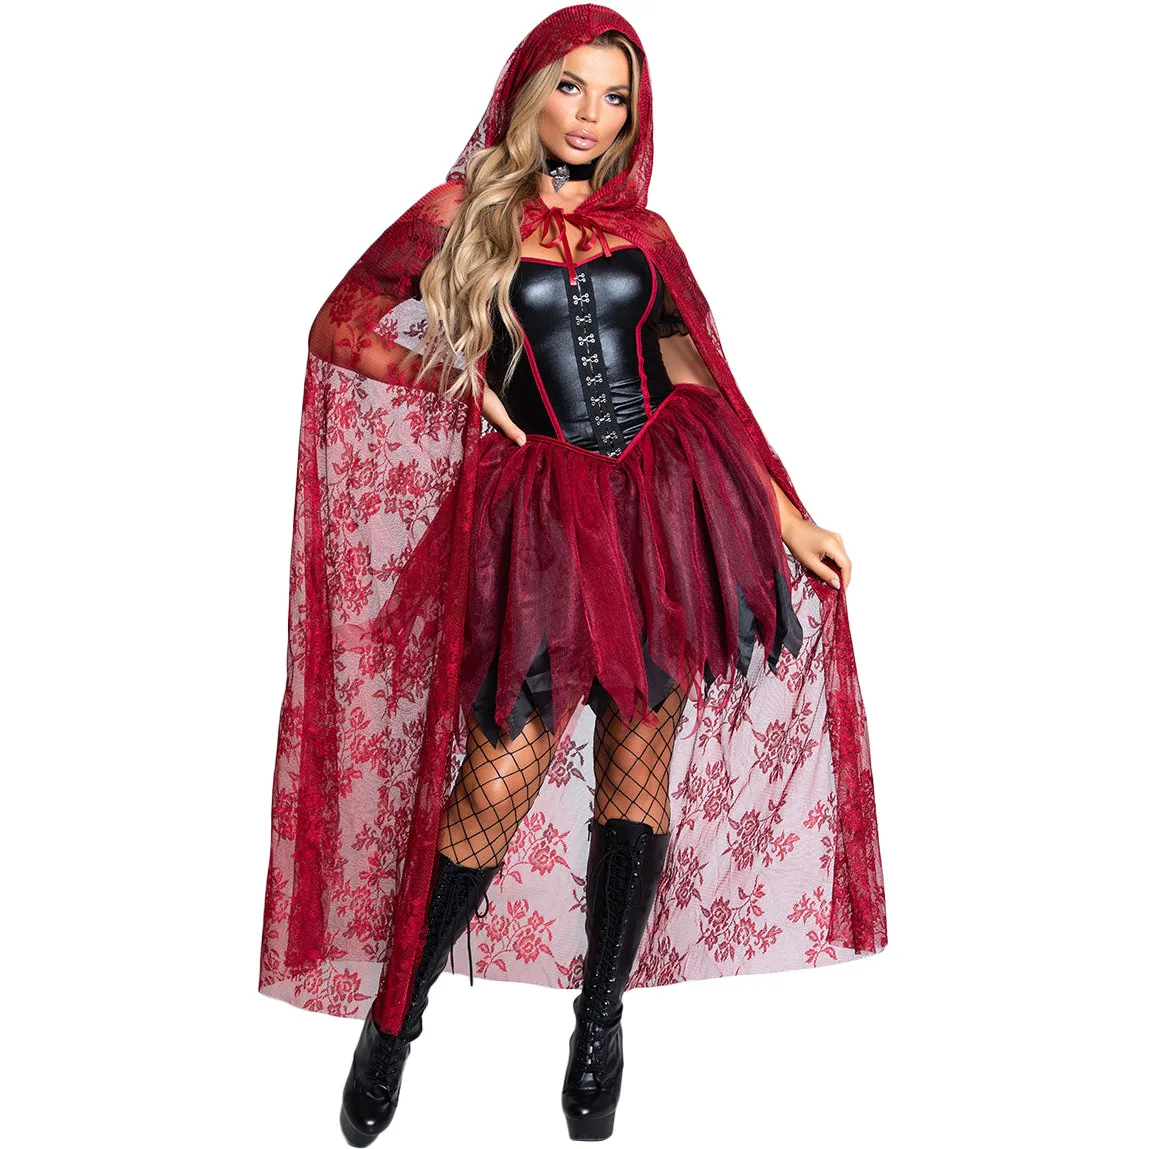 

Halloween Costumes for Women Cosplay Little Red Riding Hood Dress and Cape Suit Cloak Shawl Skirt Ladies Fairy Tale Characters